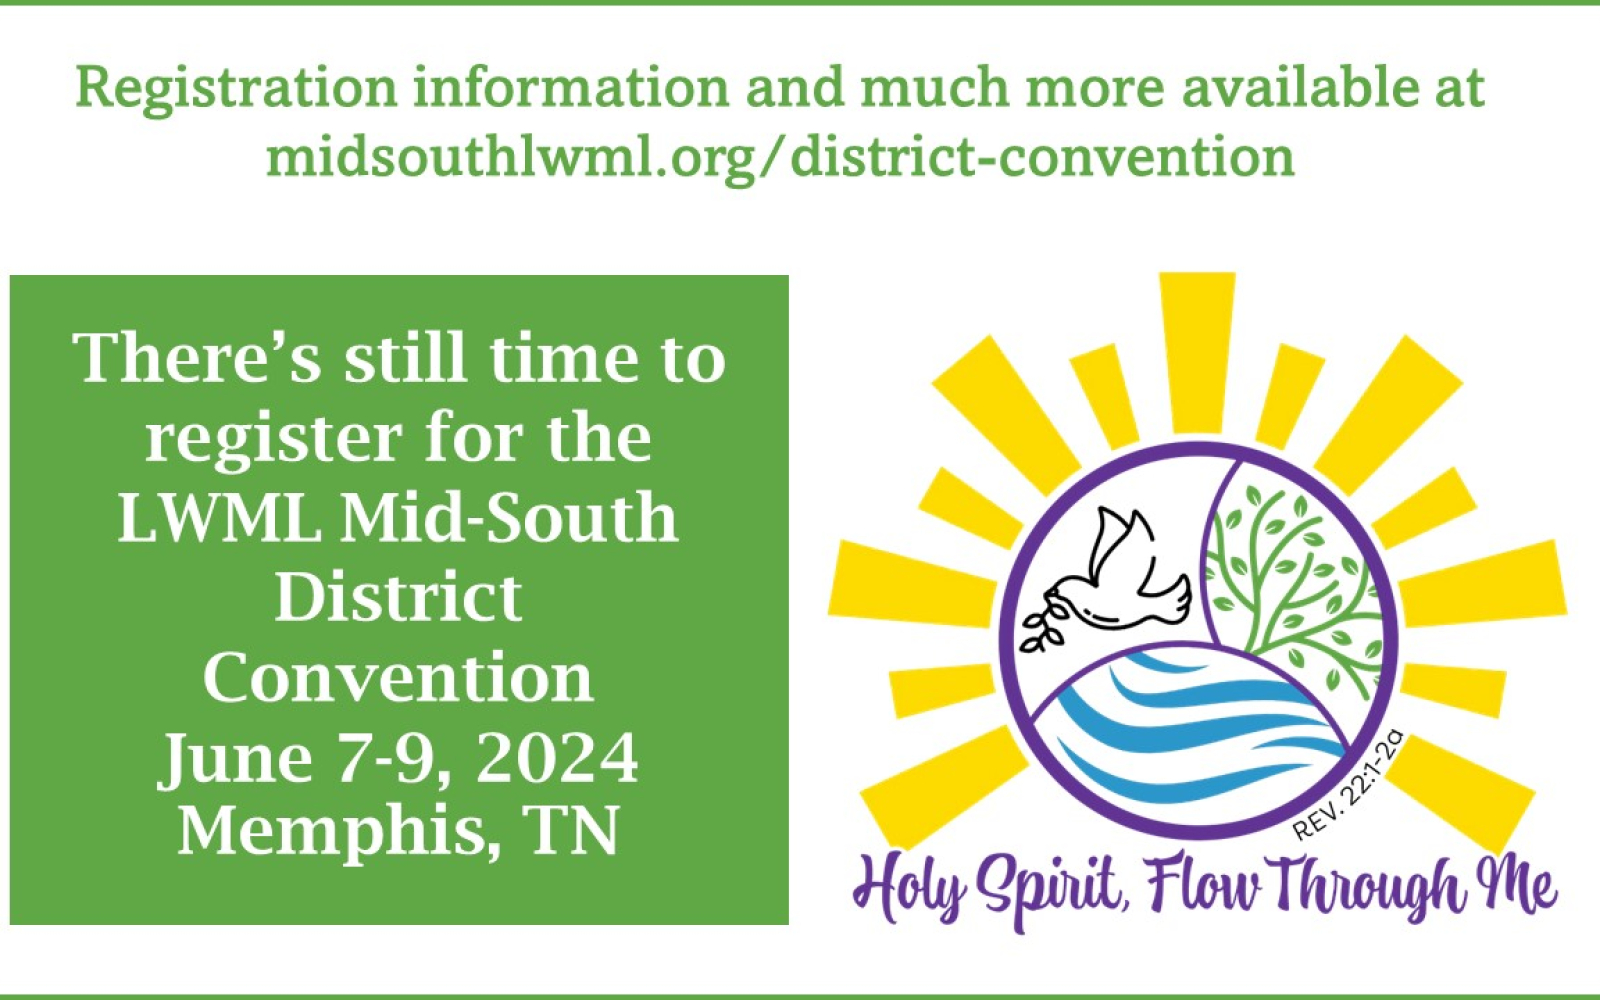 2024 Convention Information Here!